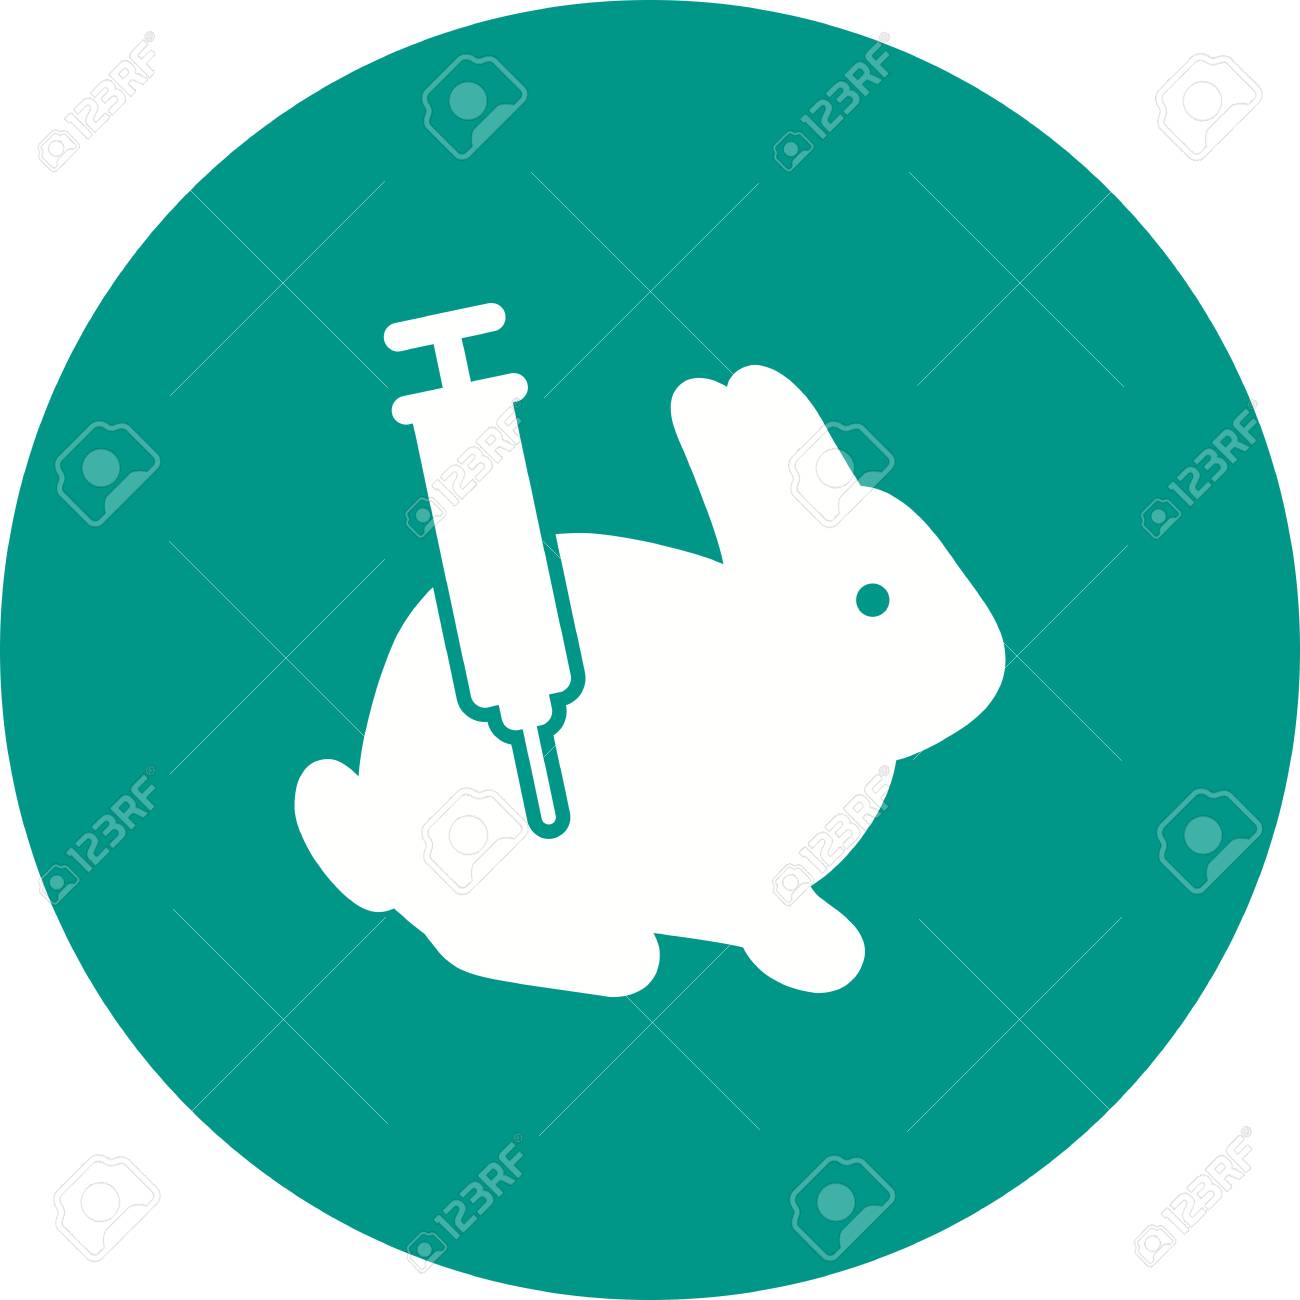 Bomex flask, chemistry, experiment, flask, lab, science, test icon 